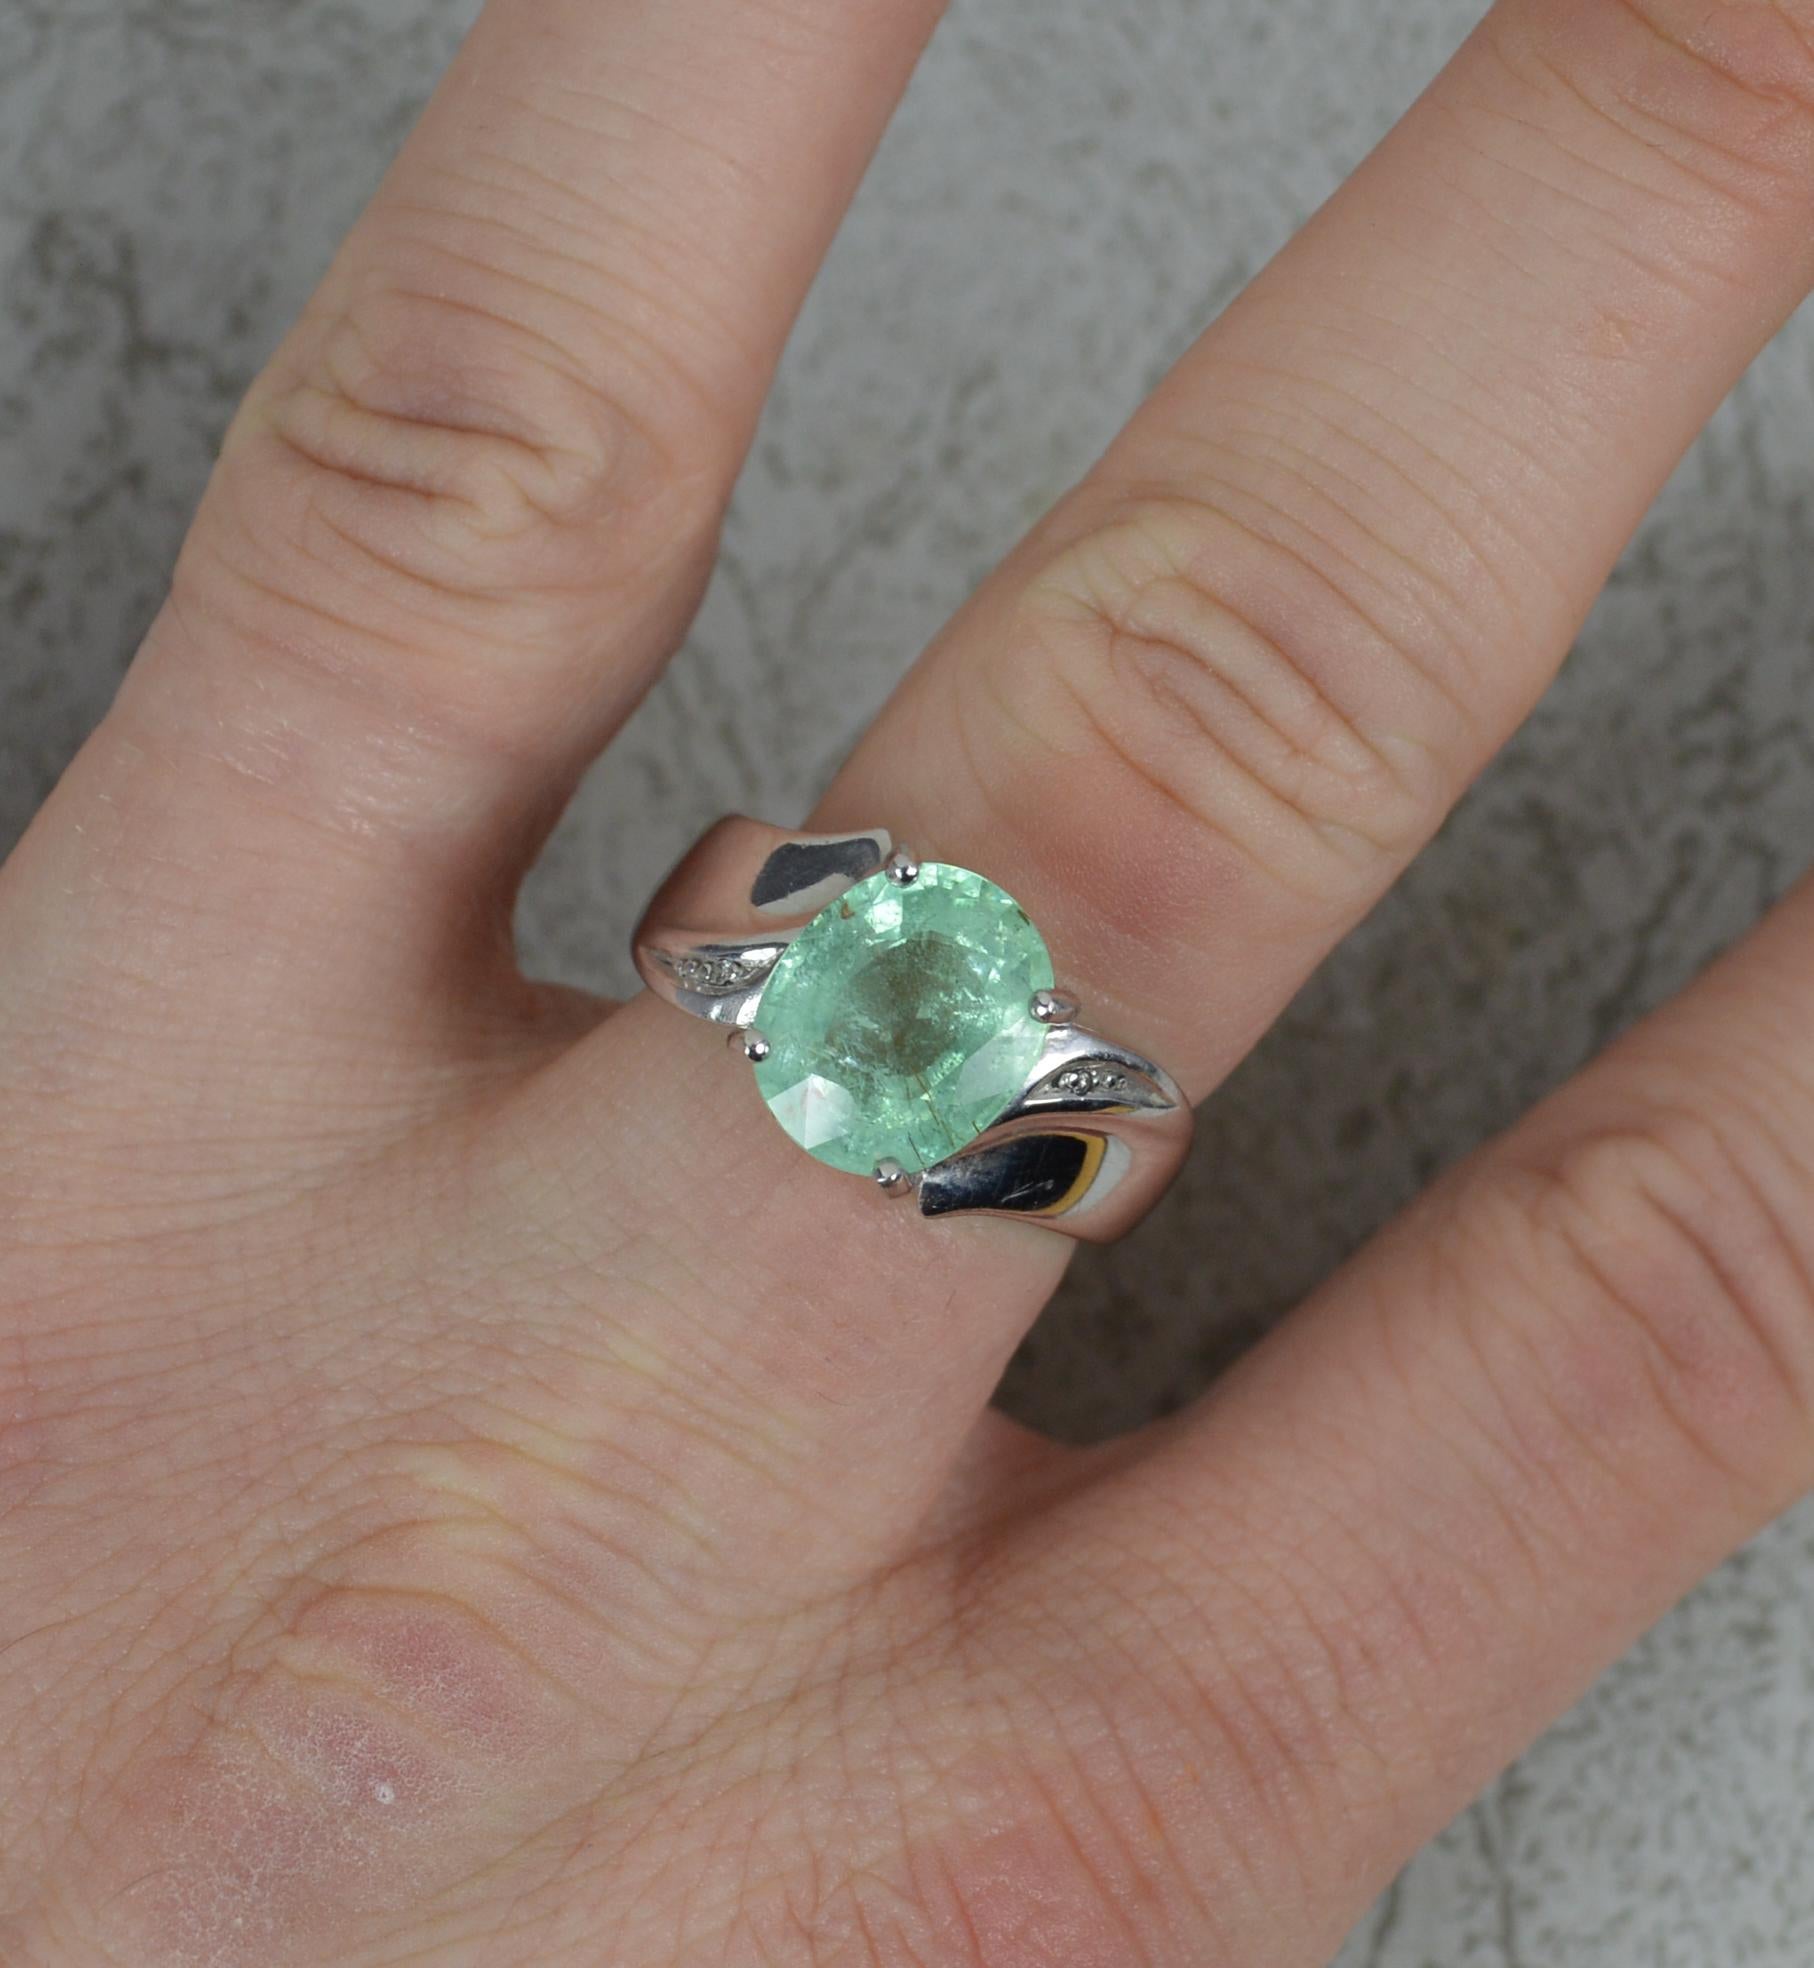 A superb tourmaline and diamond ring.
Solid 18 carat white gold example.
Designed with an oval cut paraiba tourmaline to the centre. 8mm x 11mm, approx 3 carats. To each side is a small round cut diamond.
A natural tourmaline, untreated.
CONDITION ;